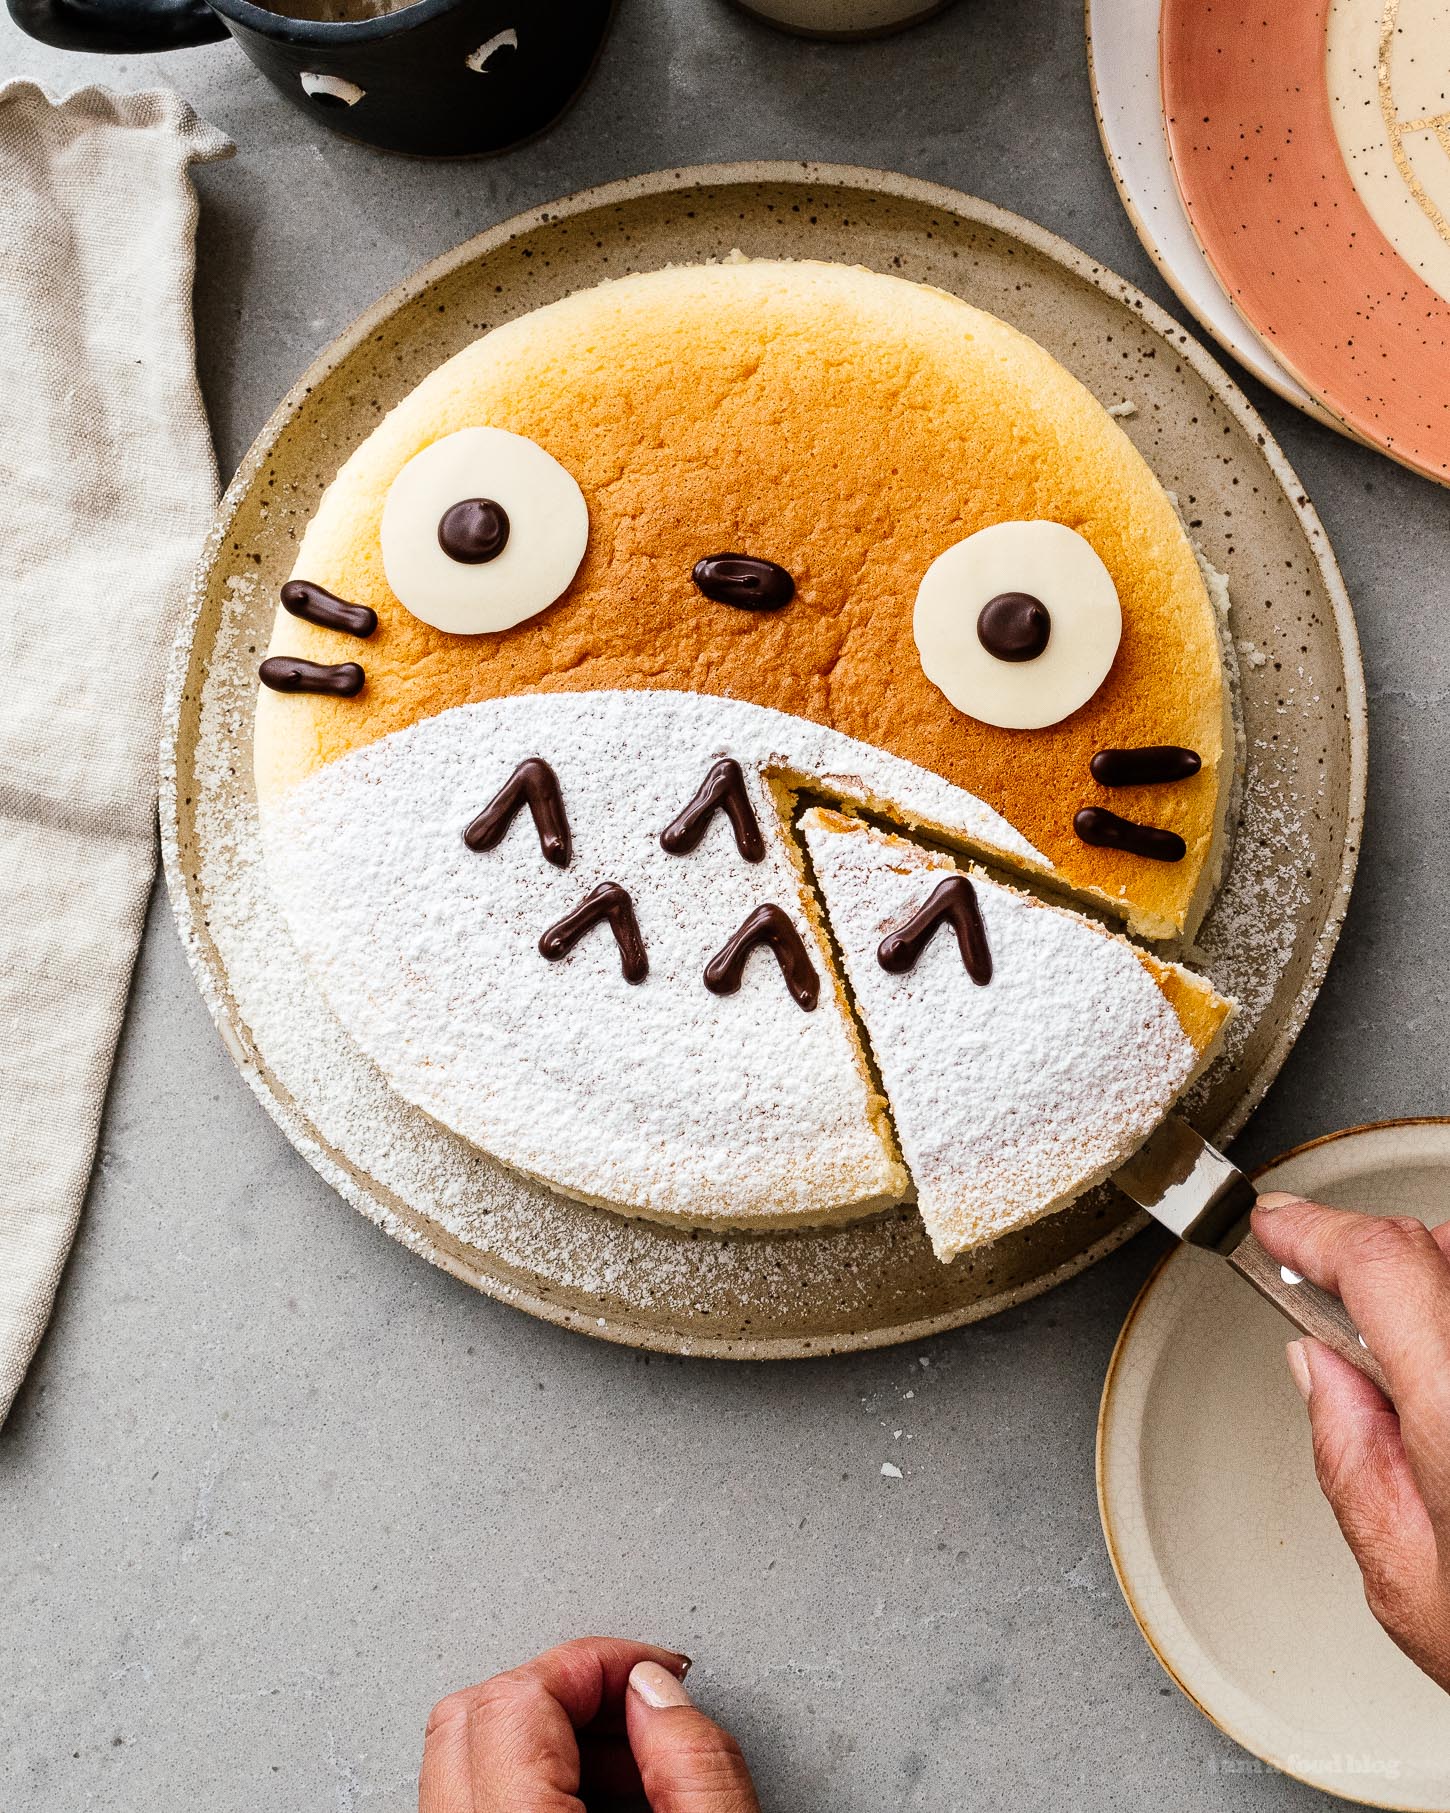 A super cute fluffy, jiggly Totoro cheesecake: pillowy soft, cotton-y, light-as-air cheesecake with just a hint of sweetness. #cheesecake #japanesecheesecake #fluffycheesecake #totorocake #totorocheesecake #totorofood #kawaiifood